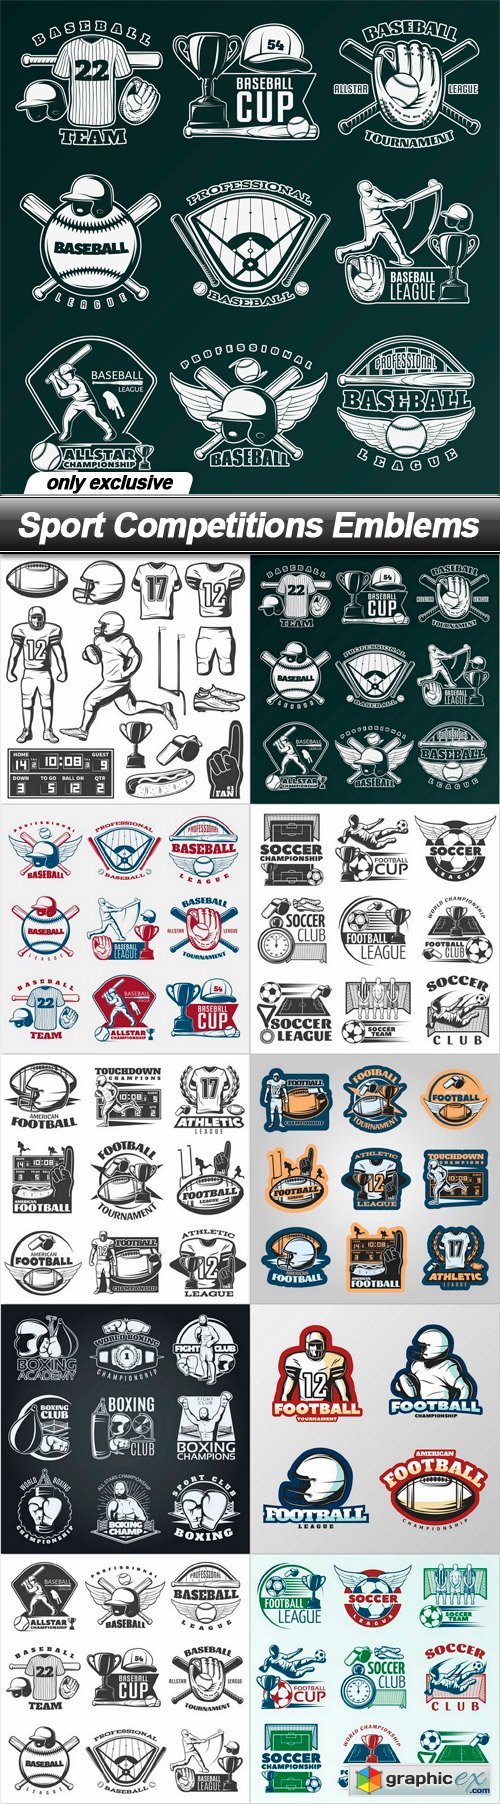 Sport Competitions Emblems - 10 EPS